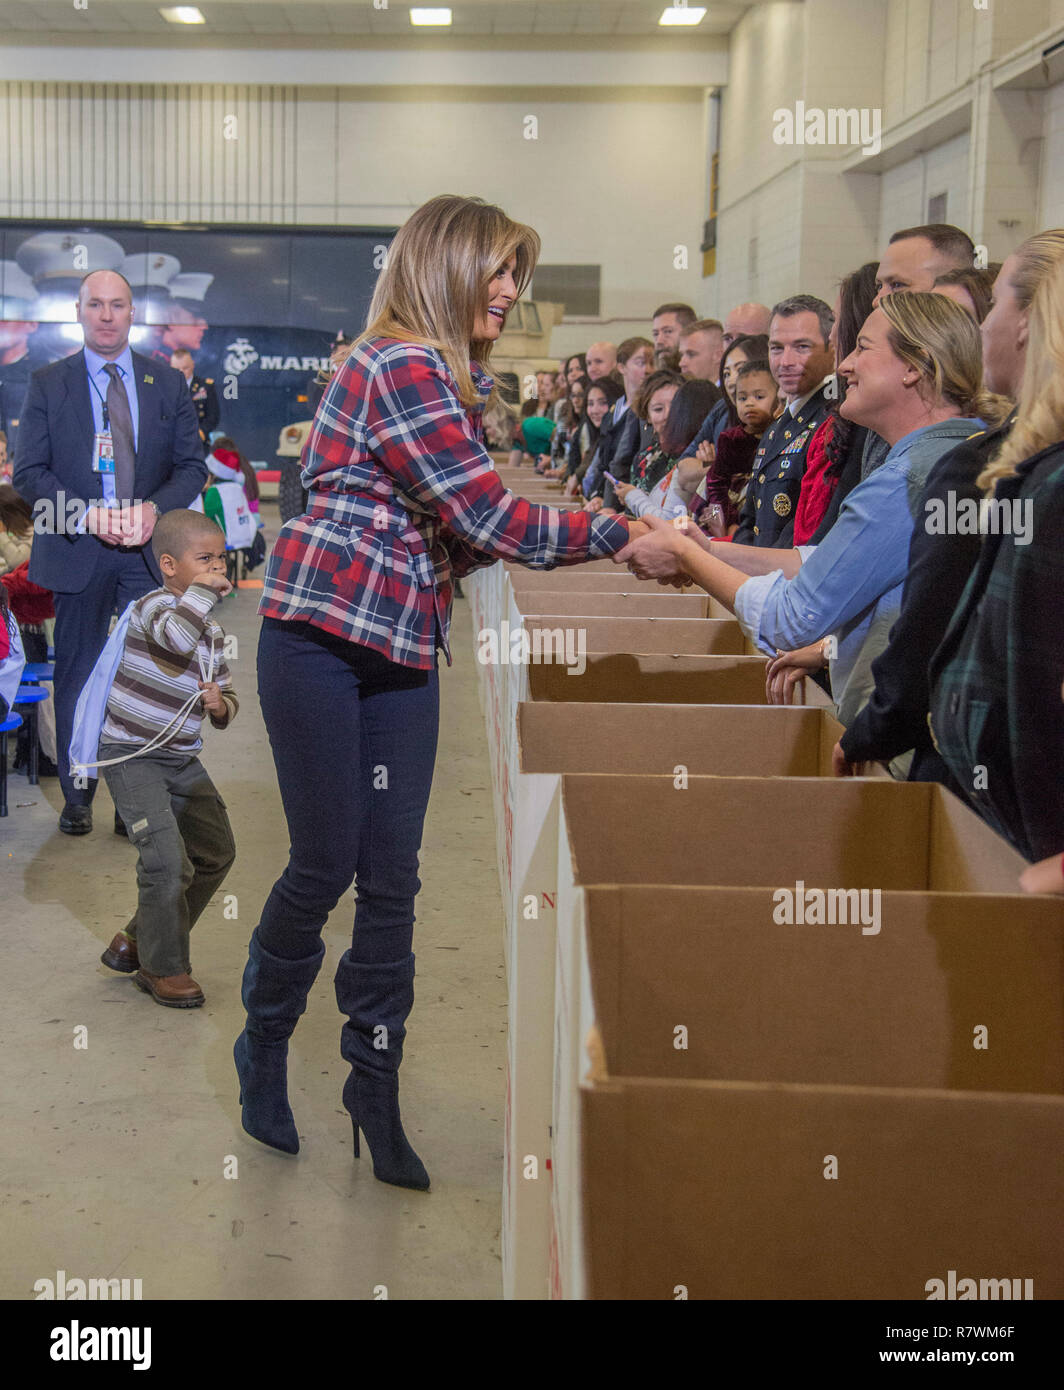 Washington, DC December 11 ,2018:  First Lady Melania Trump participates in the annual Toys for Tots program at Joint Base Andrews in Washington DC.  The First Lady was assisted in her efforts by children of Military personnel and later by Santa Claus. She also took time to greet the spouses of the members of the military stationed at Joint Base Andrews.  Credit: Patsy Lynch/Alamy Live News Stock Photo